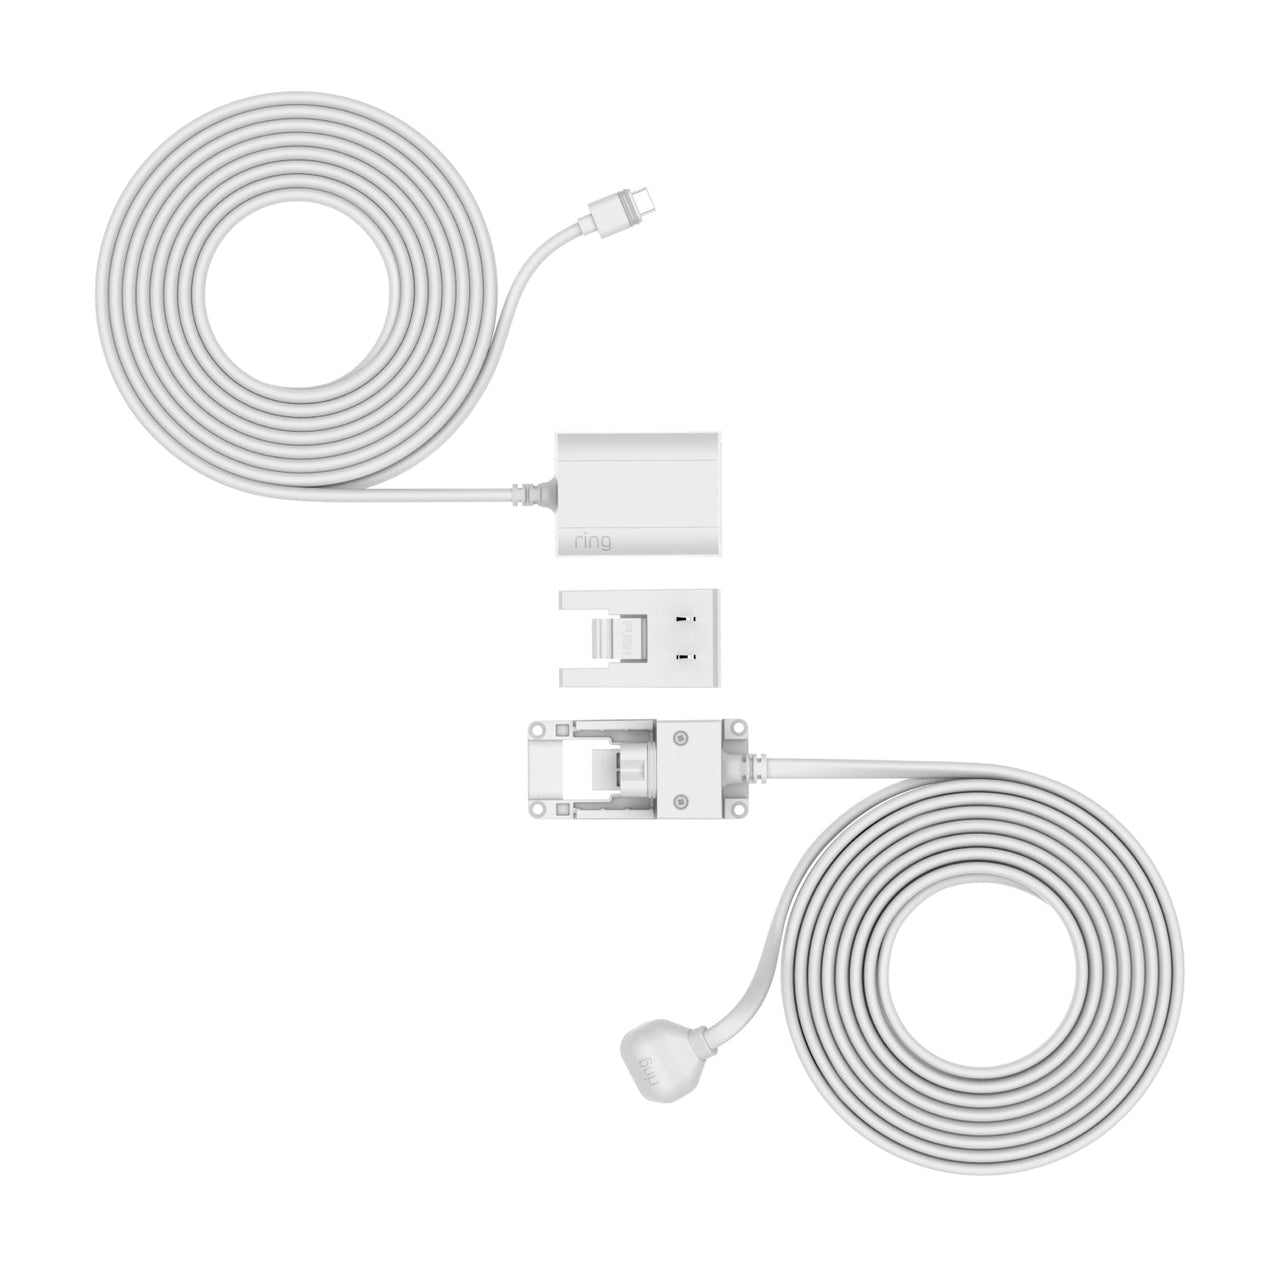 products/ring_indoor_outdoor_power_adapter_usb-c_separate_wht_1500x1500_1_e6f82c3e-2a42-4f5c-82ba-e8b507baa89d.jpg